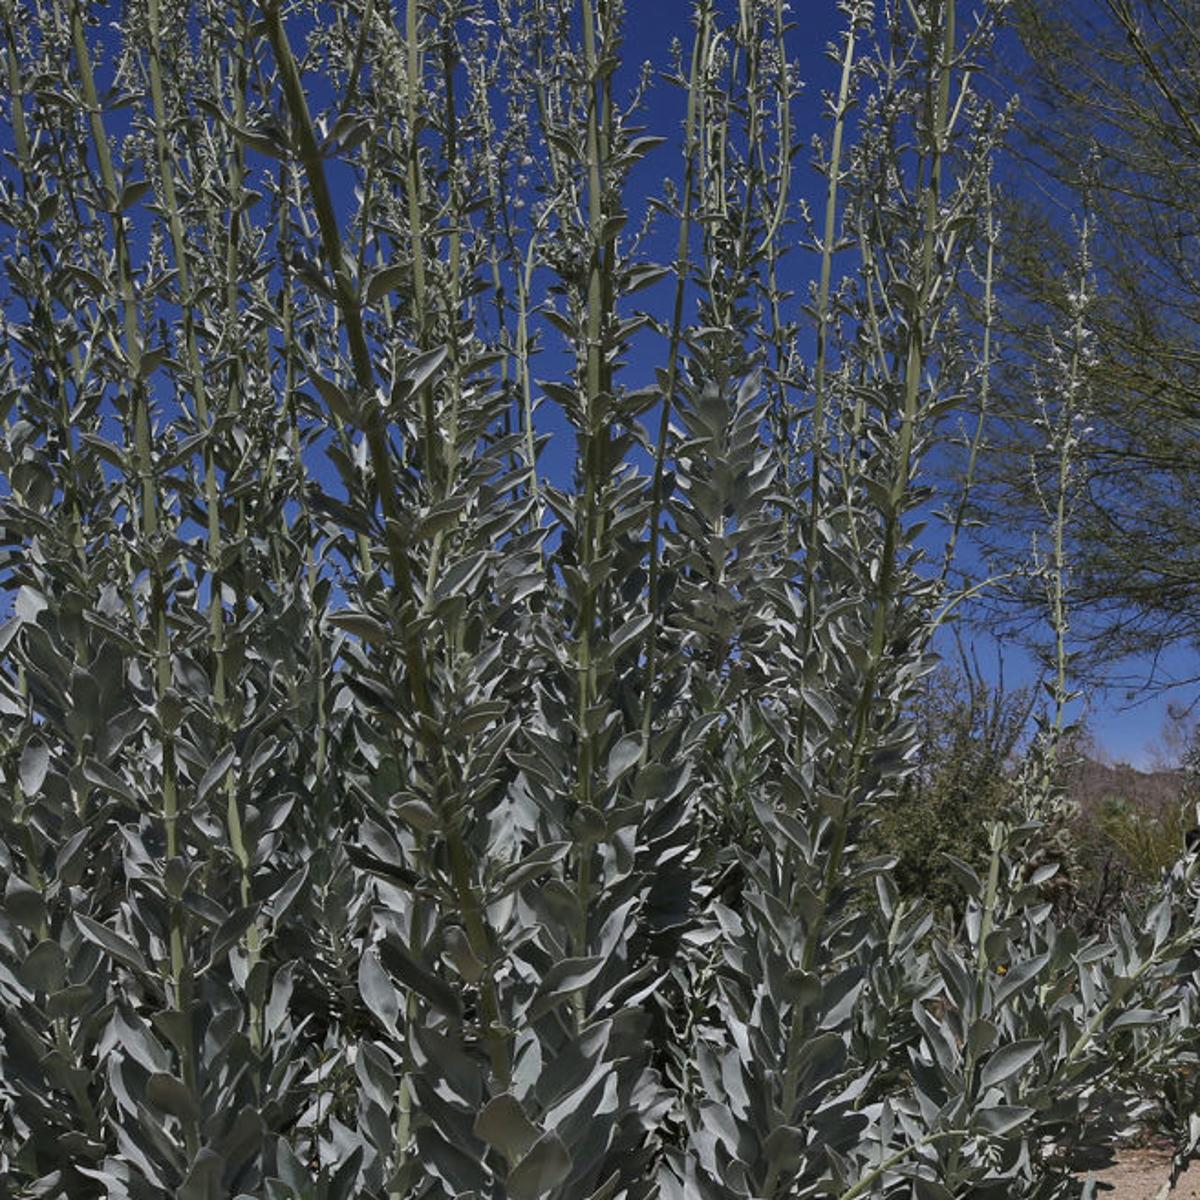 Common Desert Plants May Help Cure What Ails You Local News Tucson Com,How Long To Cook Chicken Breast At 350